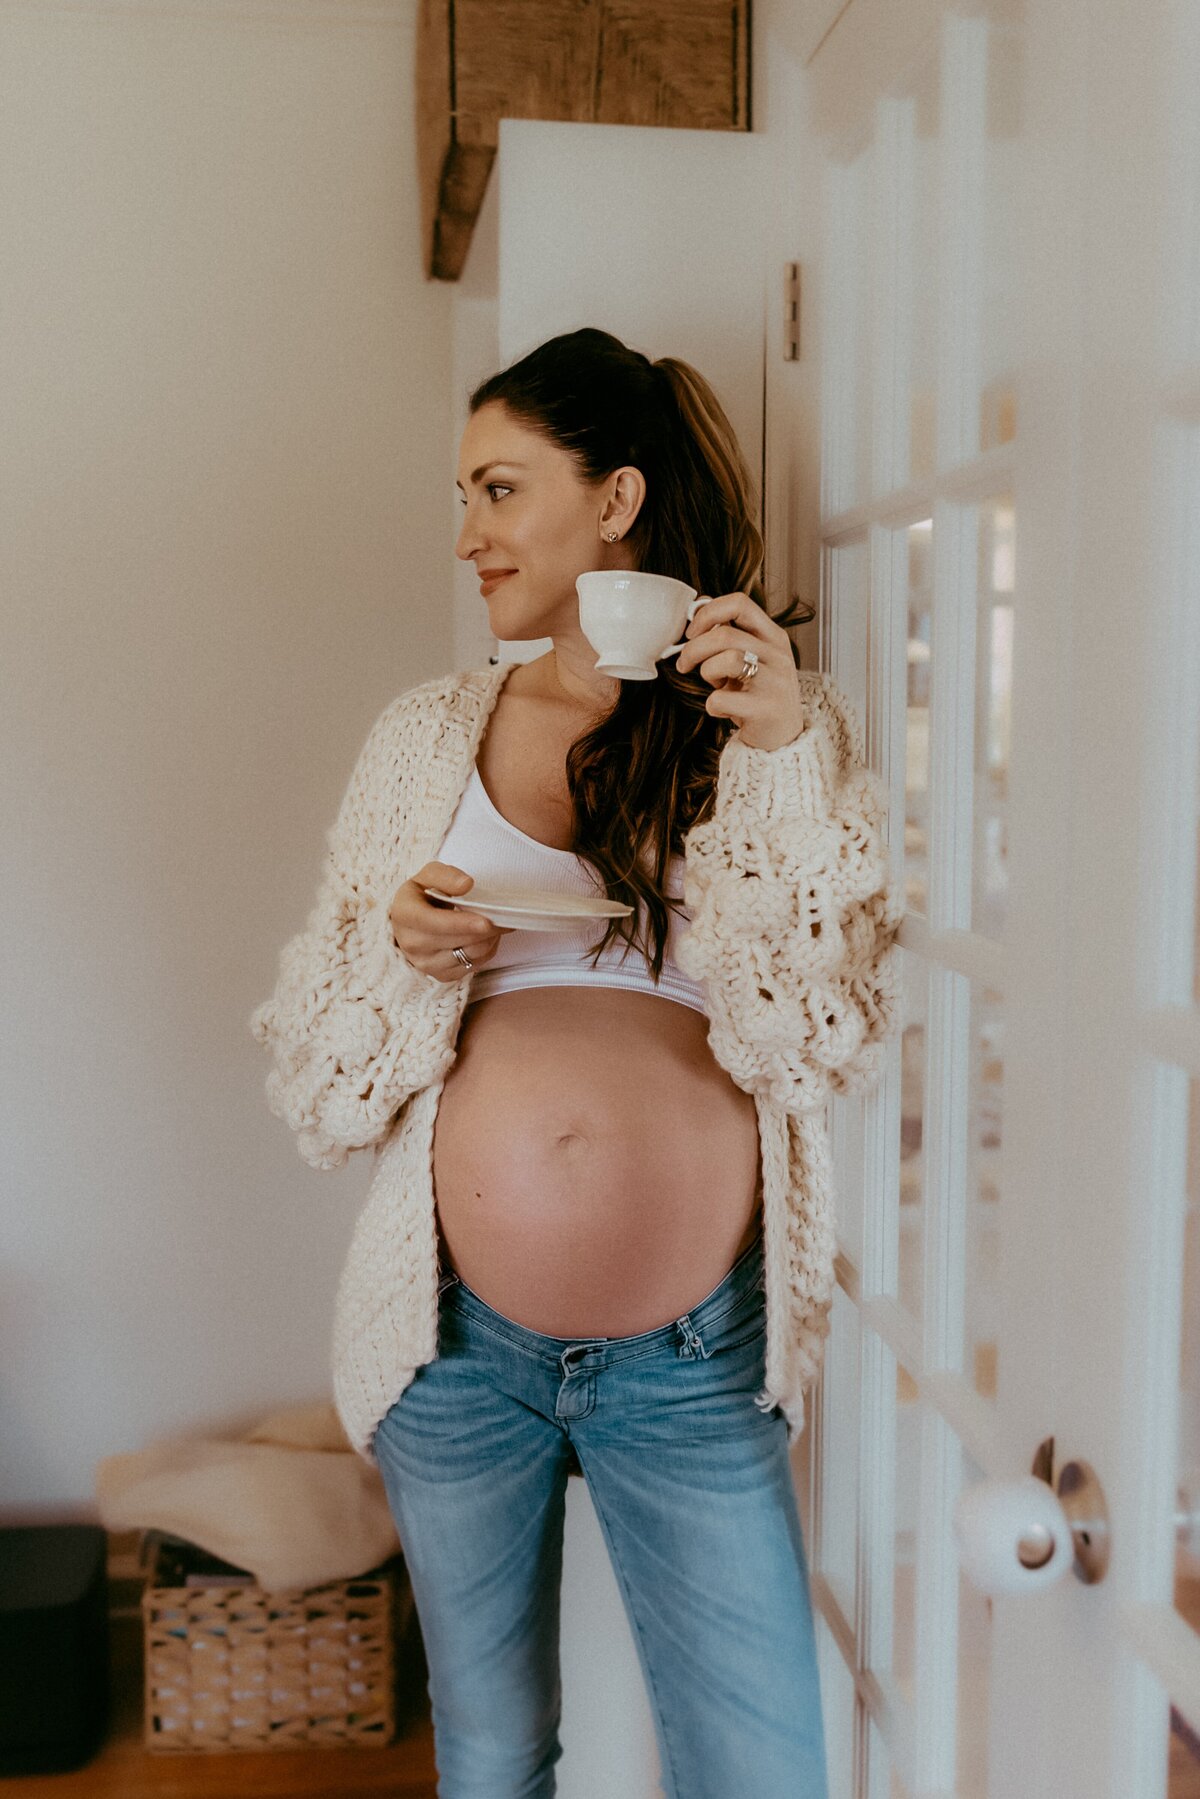 A woman with long hair, wearing a white top and jeans, stands by a door, holding a white cup and saucer. She is visibly pregnant and has a relaxed expression.